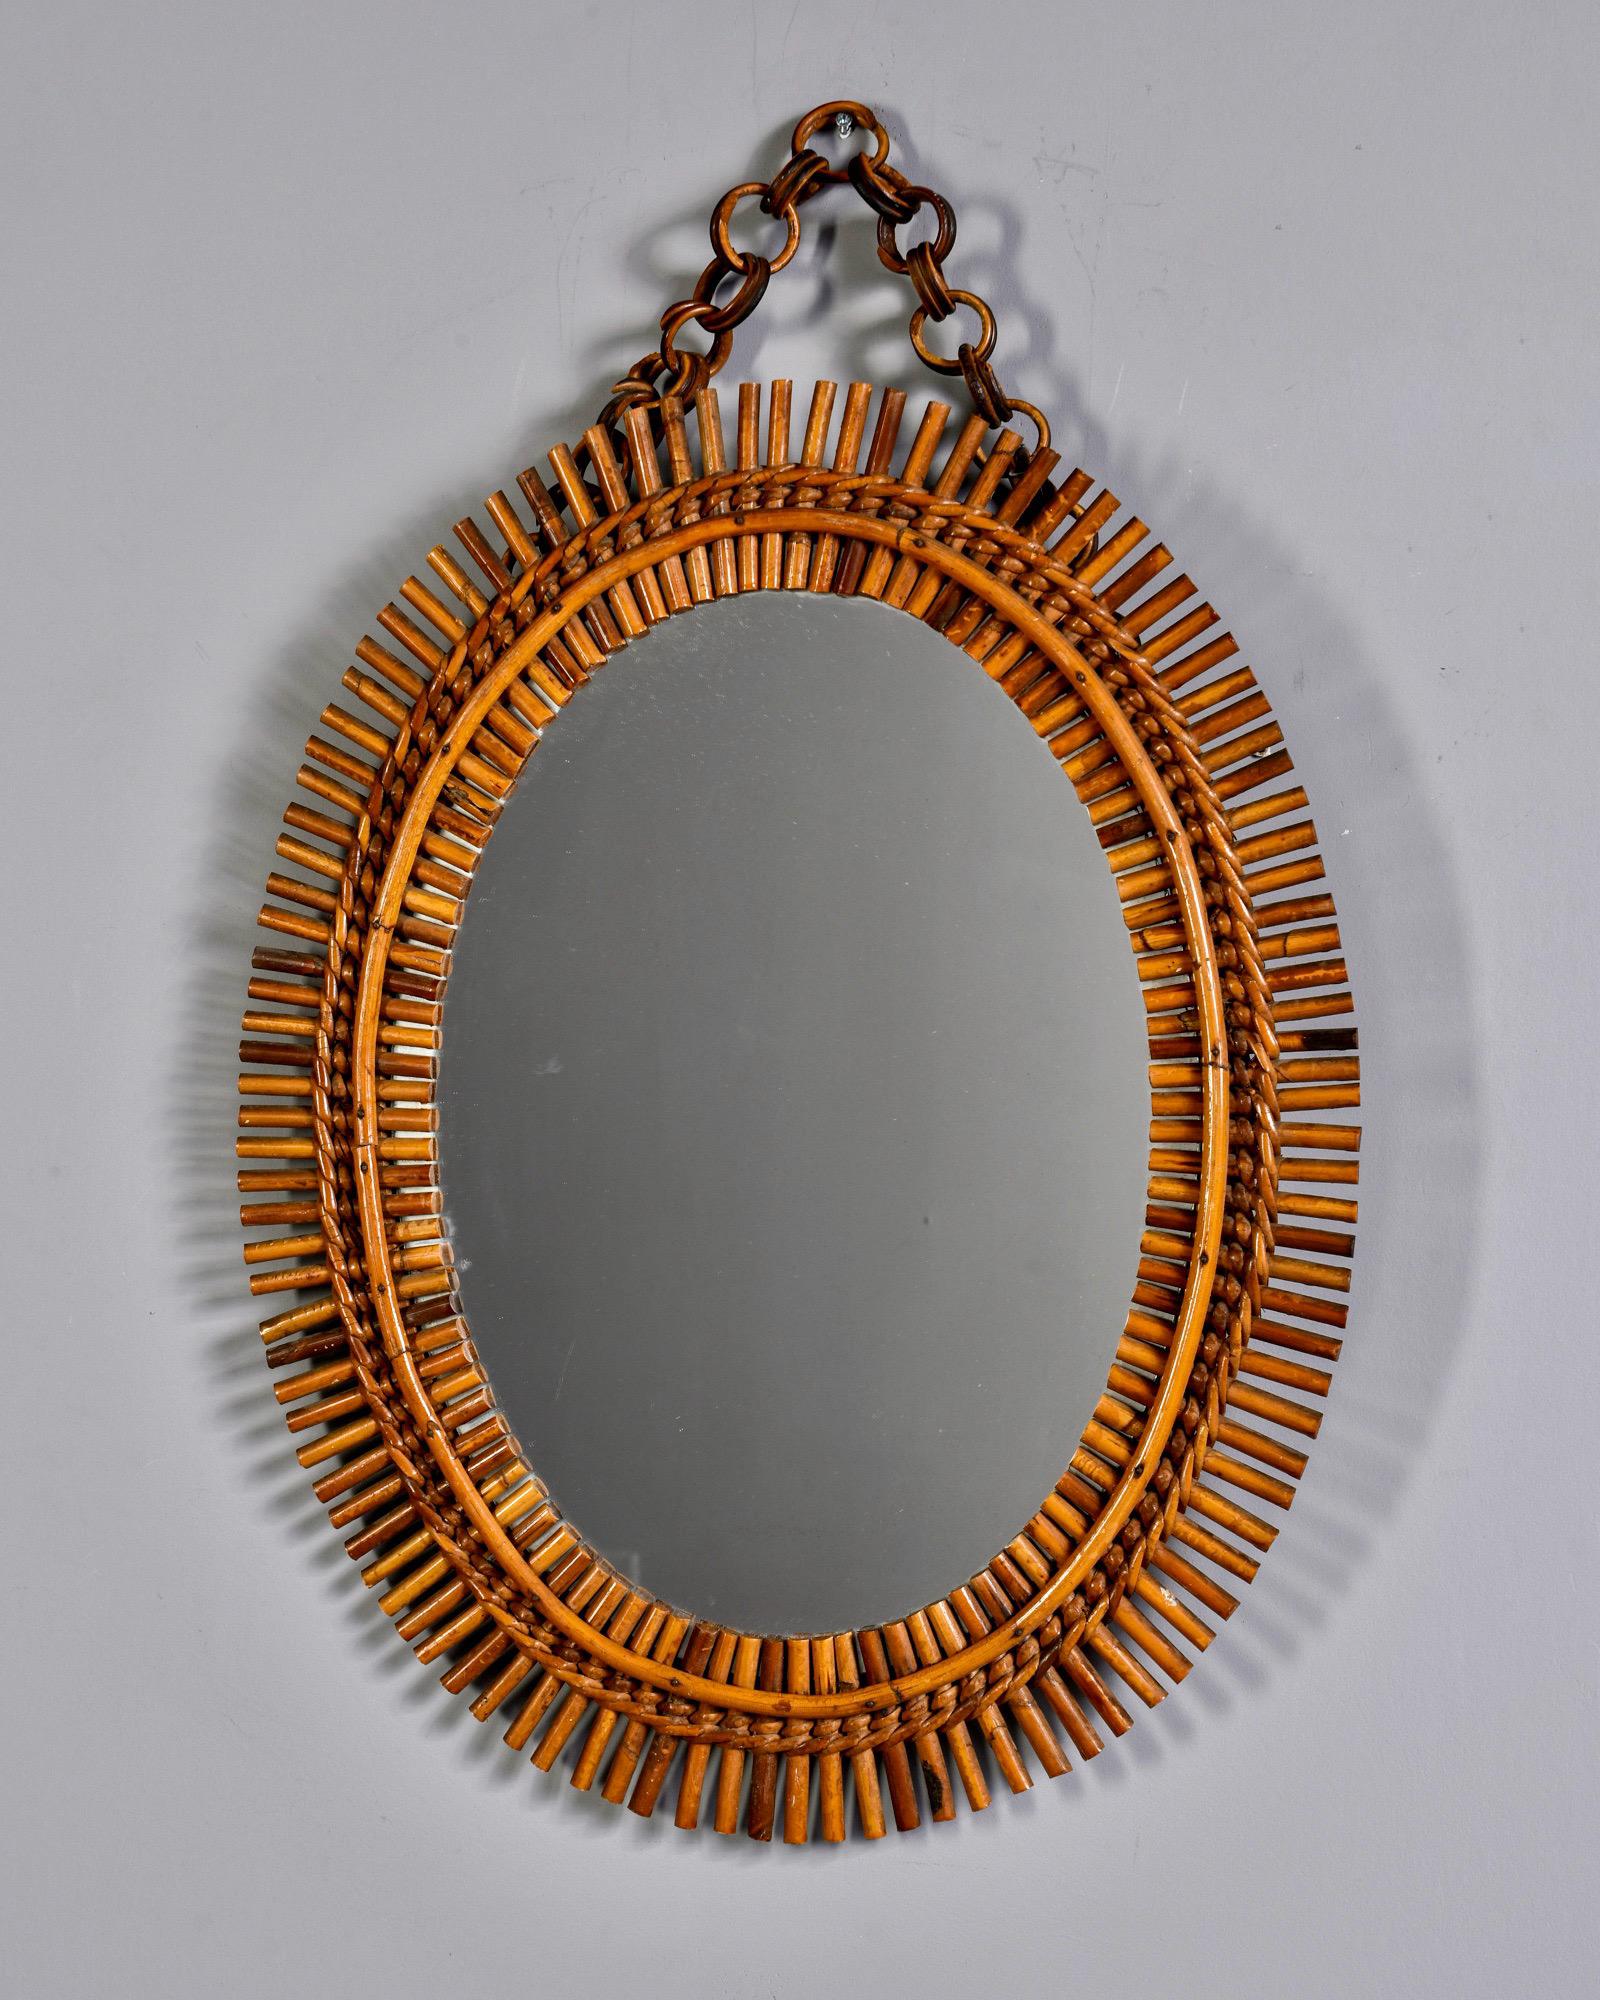 Circa 1970s oval mirror with hand made rattan frame and metal hanging chain. Unknown maker. Found in France. 

Actual mirror size: 16.25” H x 11.25” W
Hanging height: 27.5” includes chain.